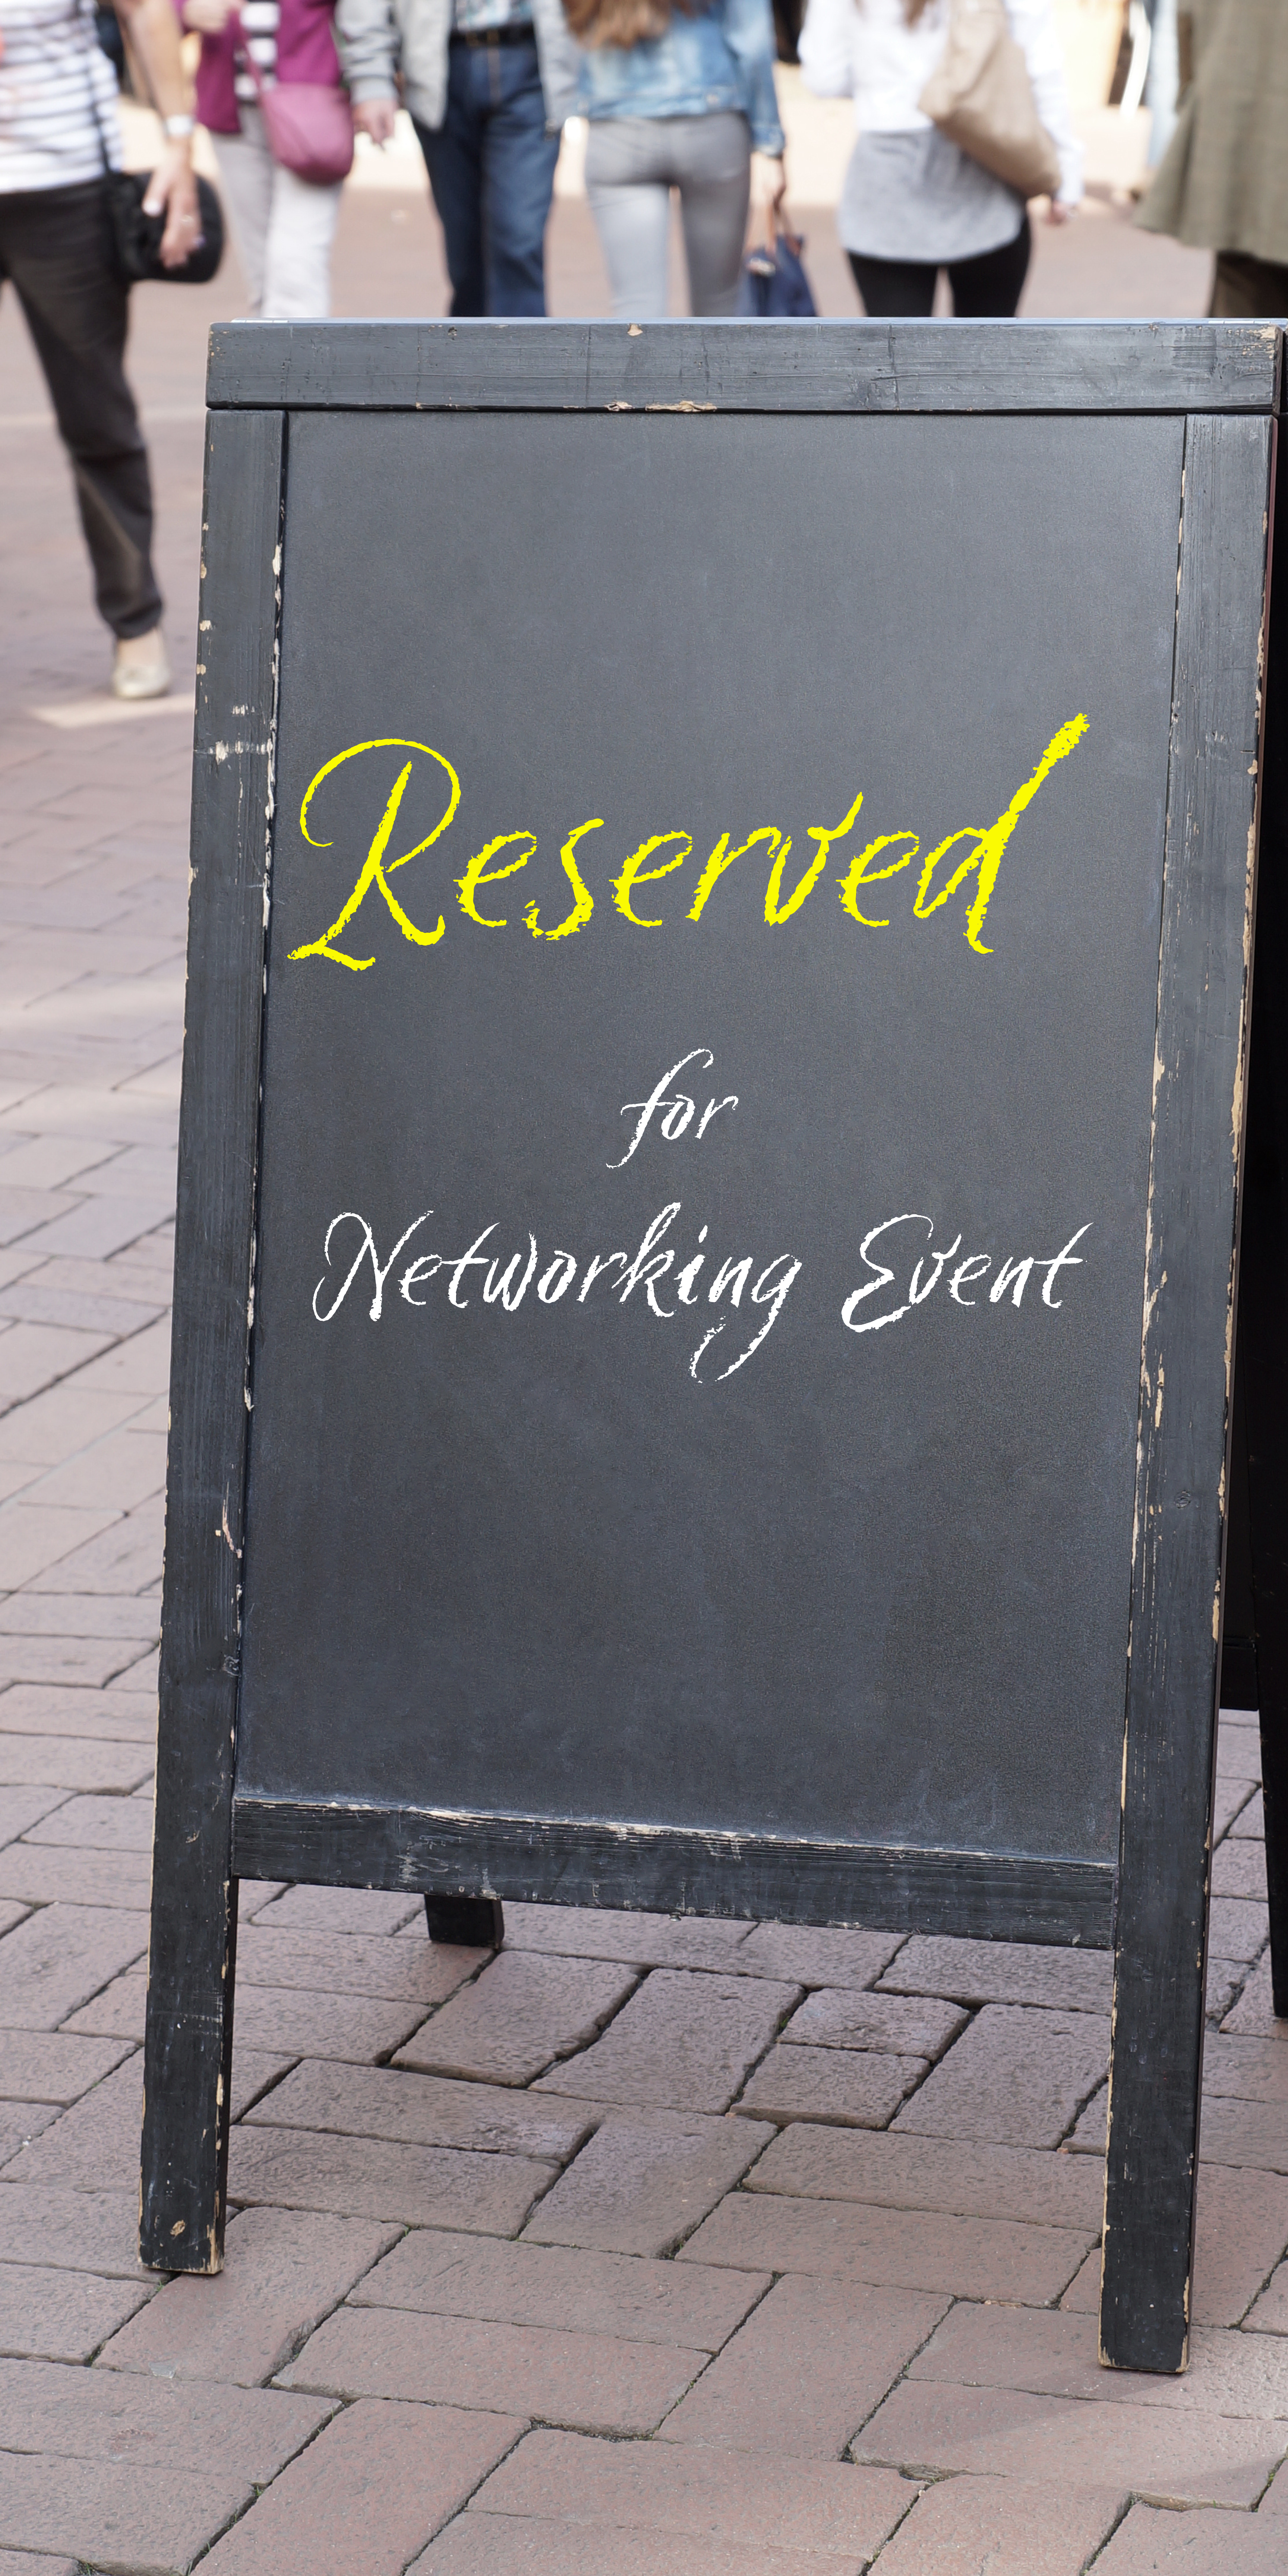 Reserved for Networking Event